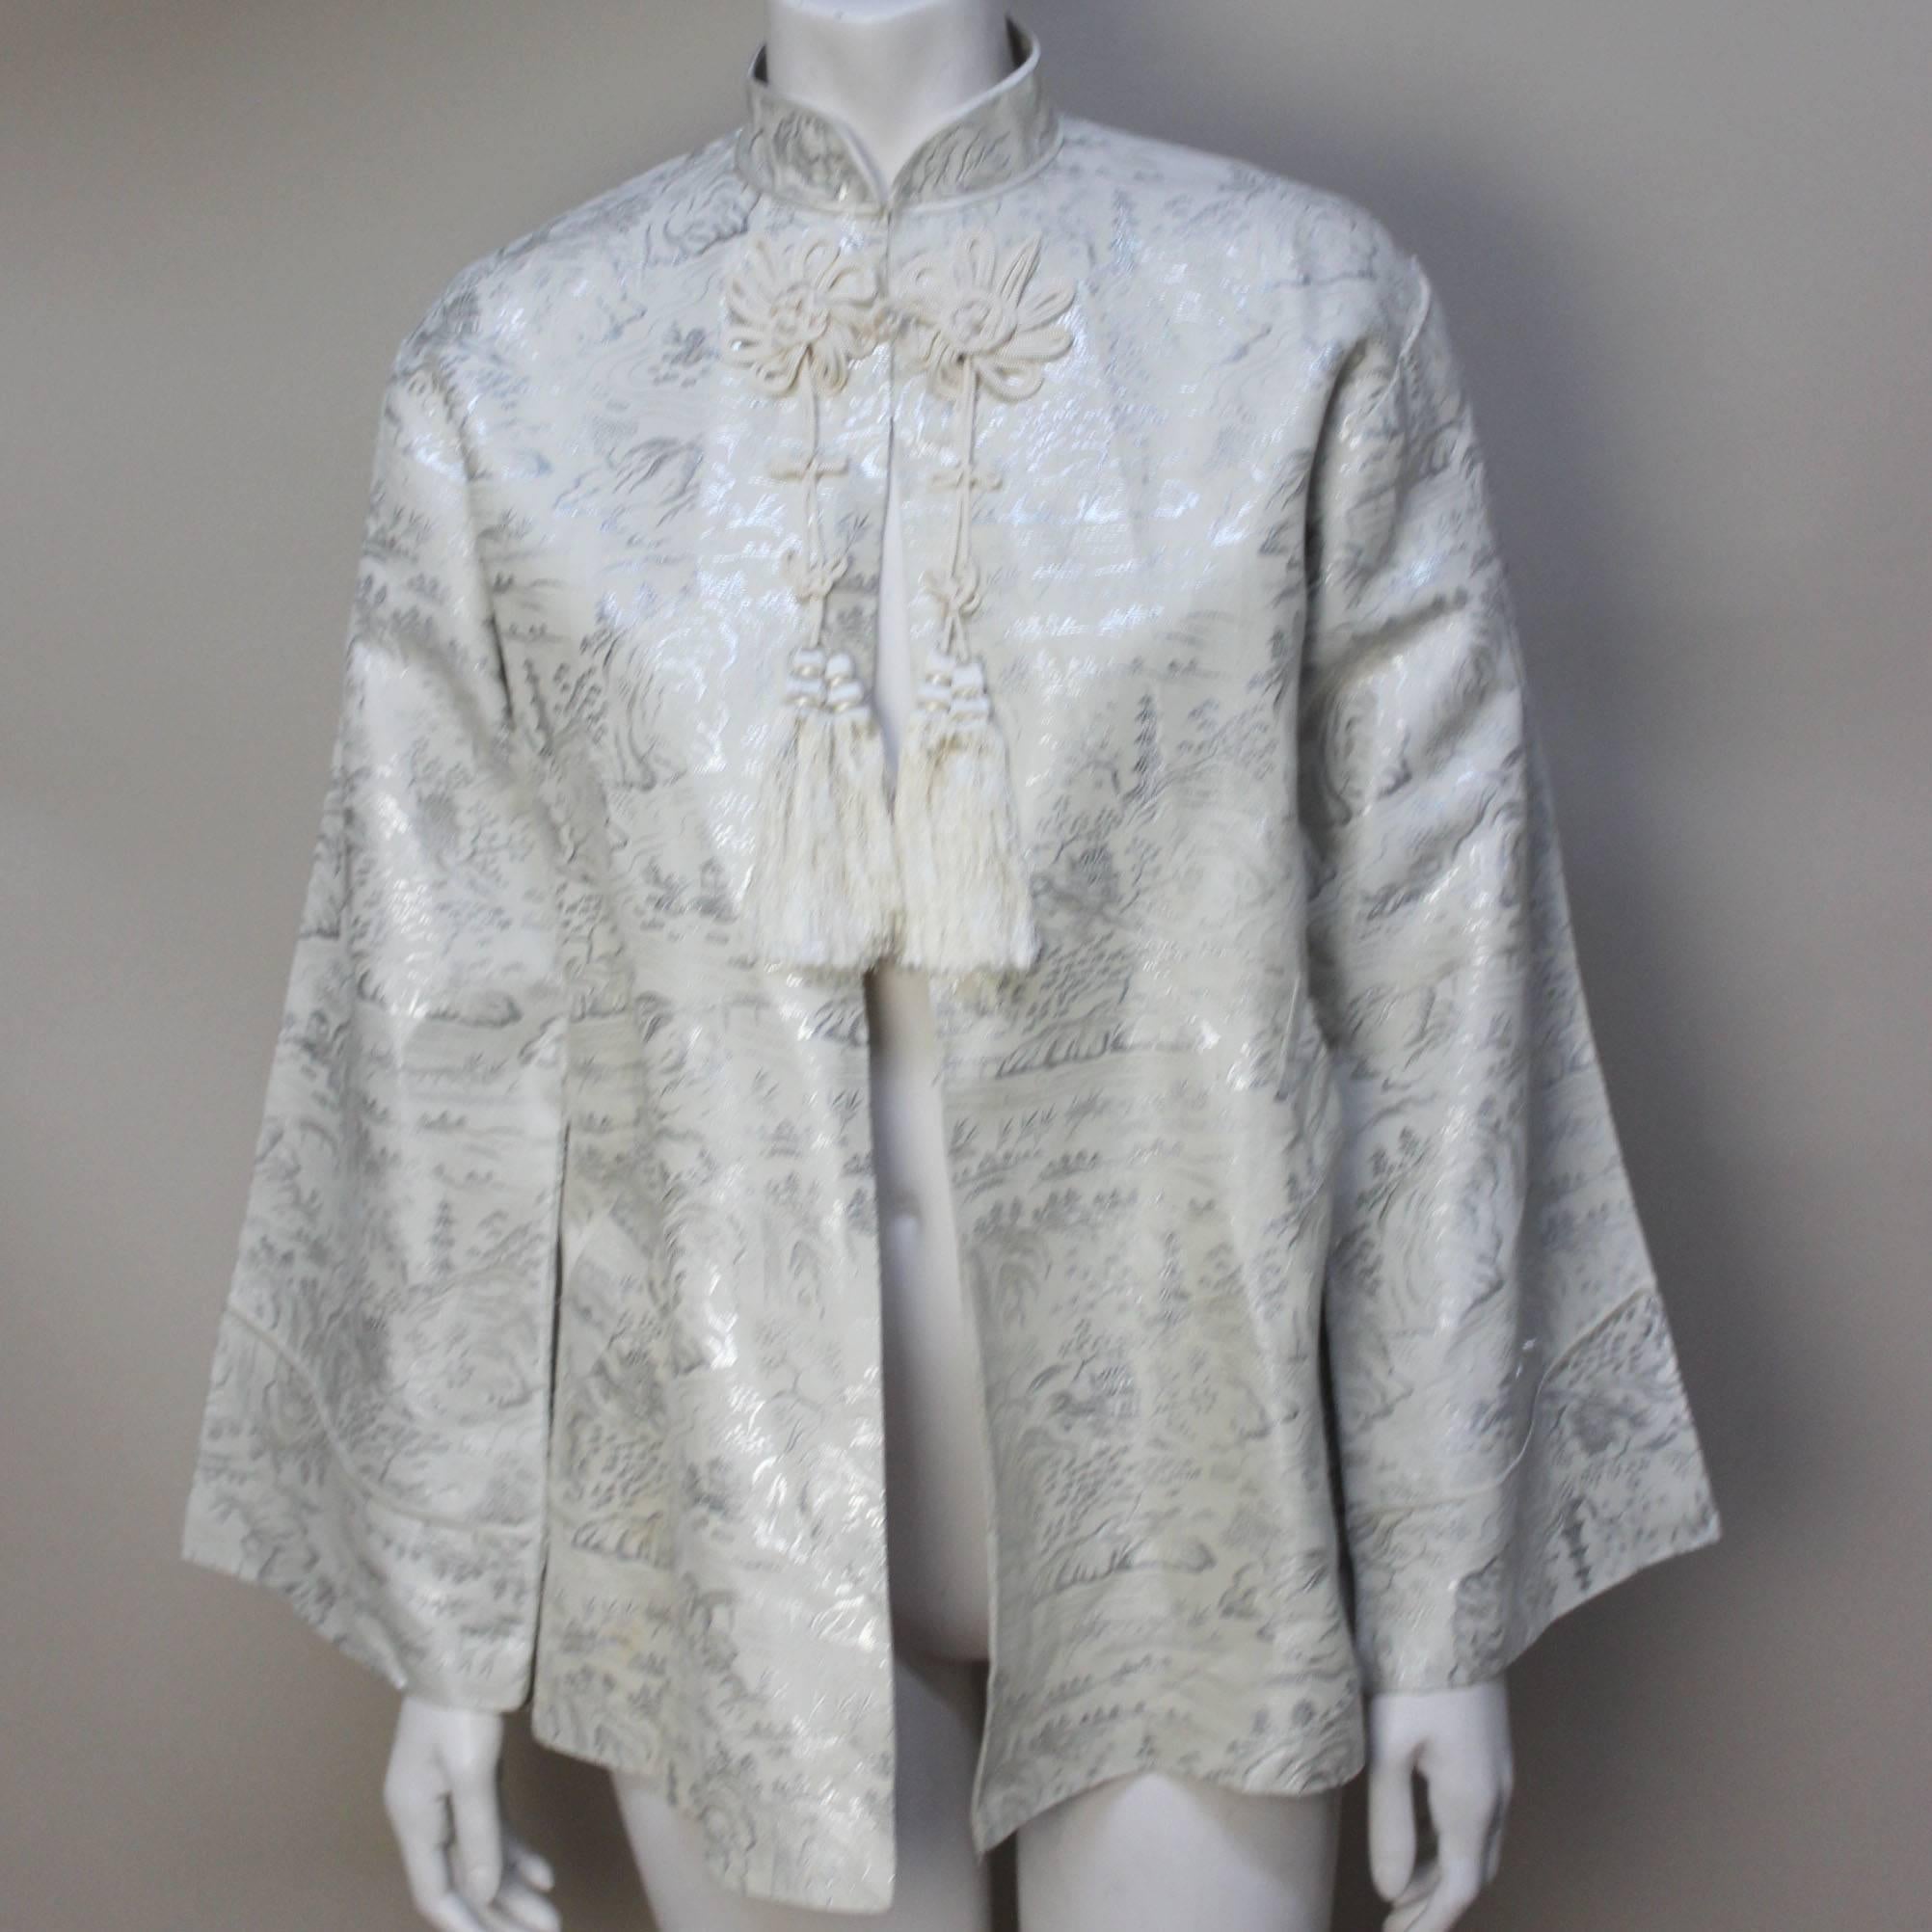 This is a gorgeous 1940's jacket with knotted florets, tassels and a silver on ivory design of a Chinese landscape. It has a classic mandarin style collar with a fastening at the neck and is completely lined. The silouette is slightly a-line with